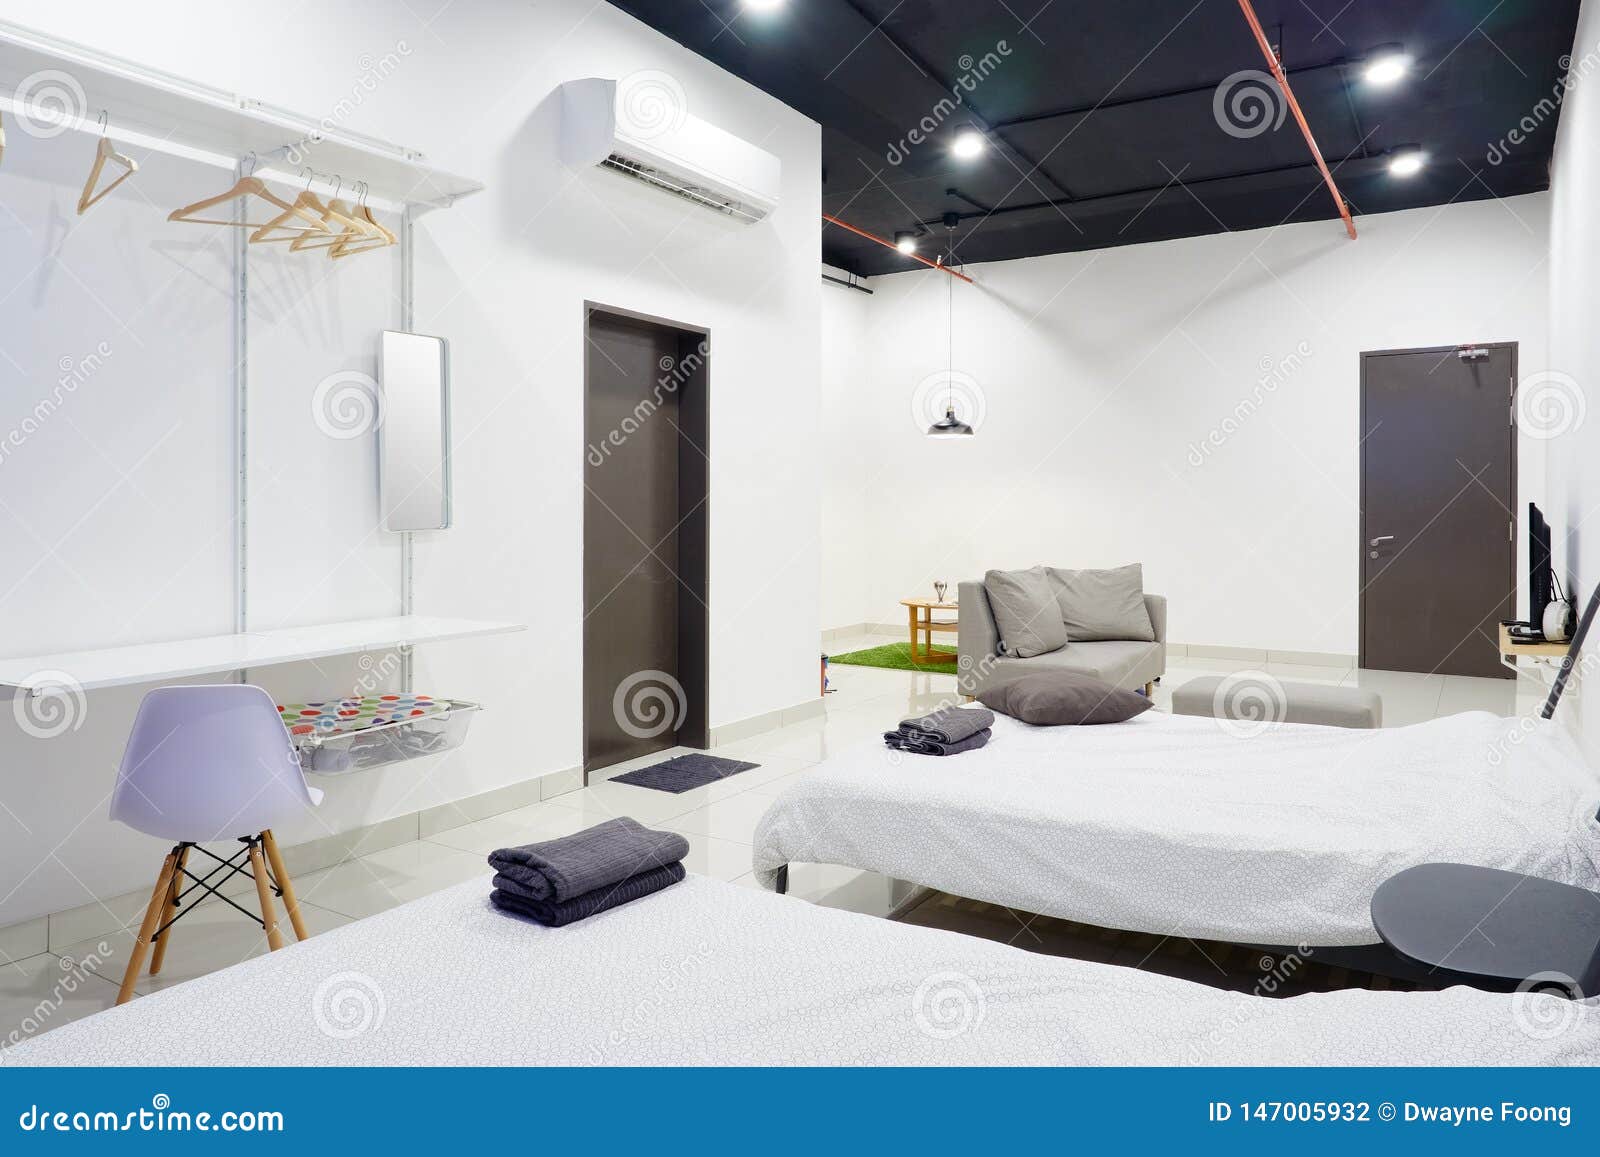 A Small Cosy Studio Apartment Stock Photo Image Of Television Interior 147005932,Blueprint Master Bedroom Ensuite Design Layout